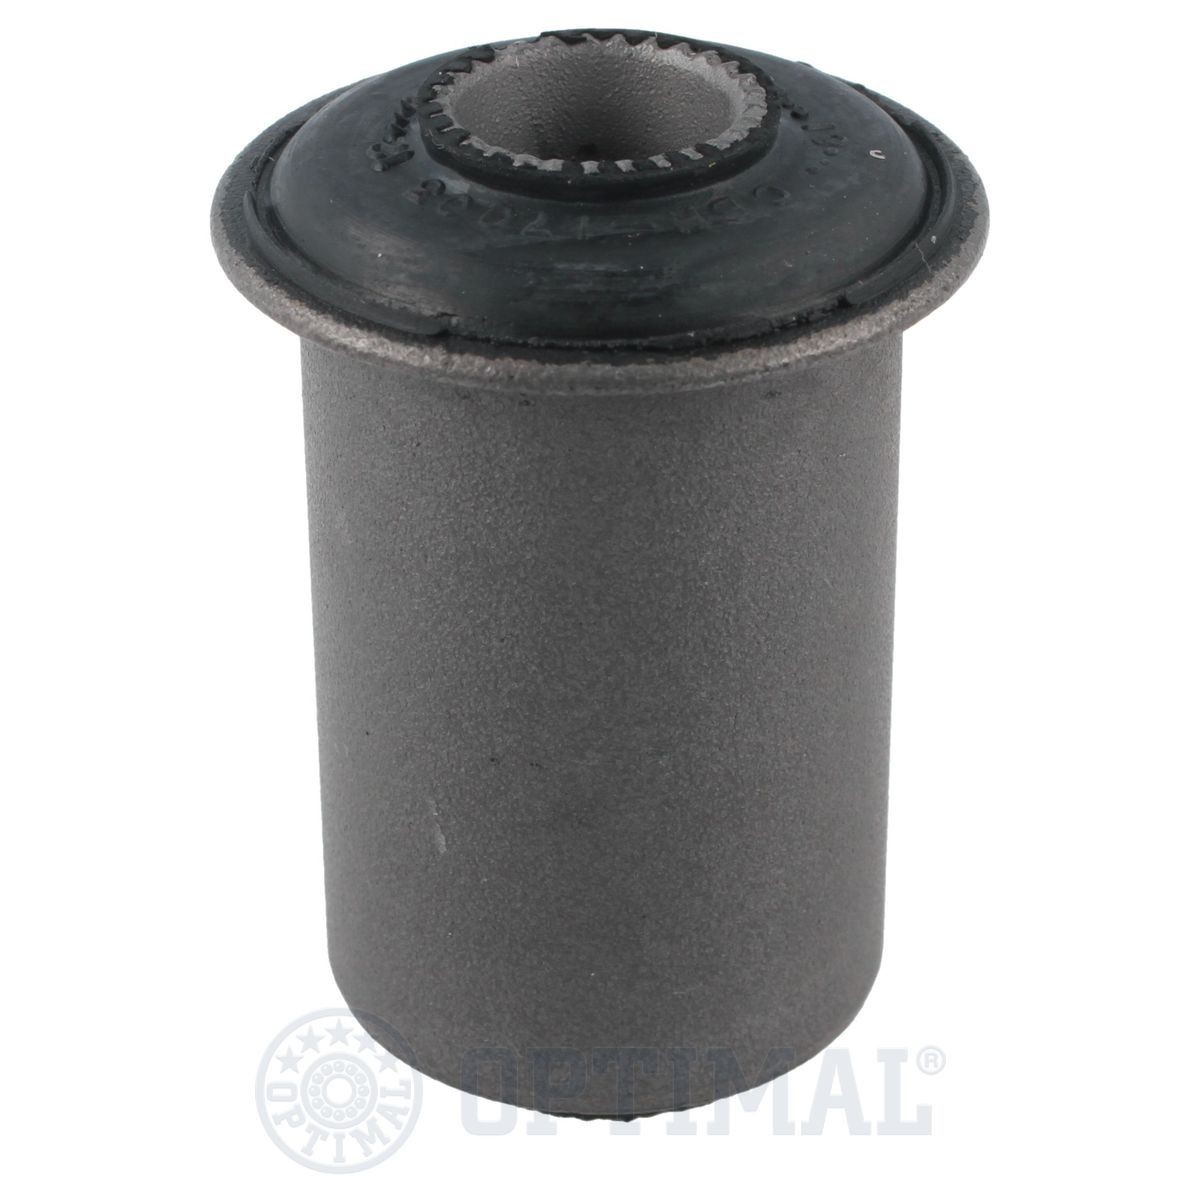 F8-5129 OPTIMAL Suspension bushes VOLVO Lower, Front, Front Axle, both sides, 64,5mm, Rubber-Metal Mount, for control arm